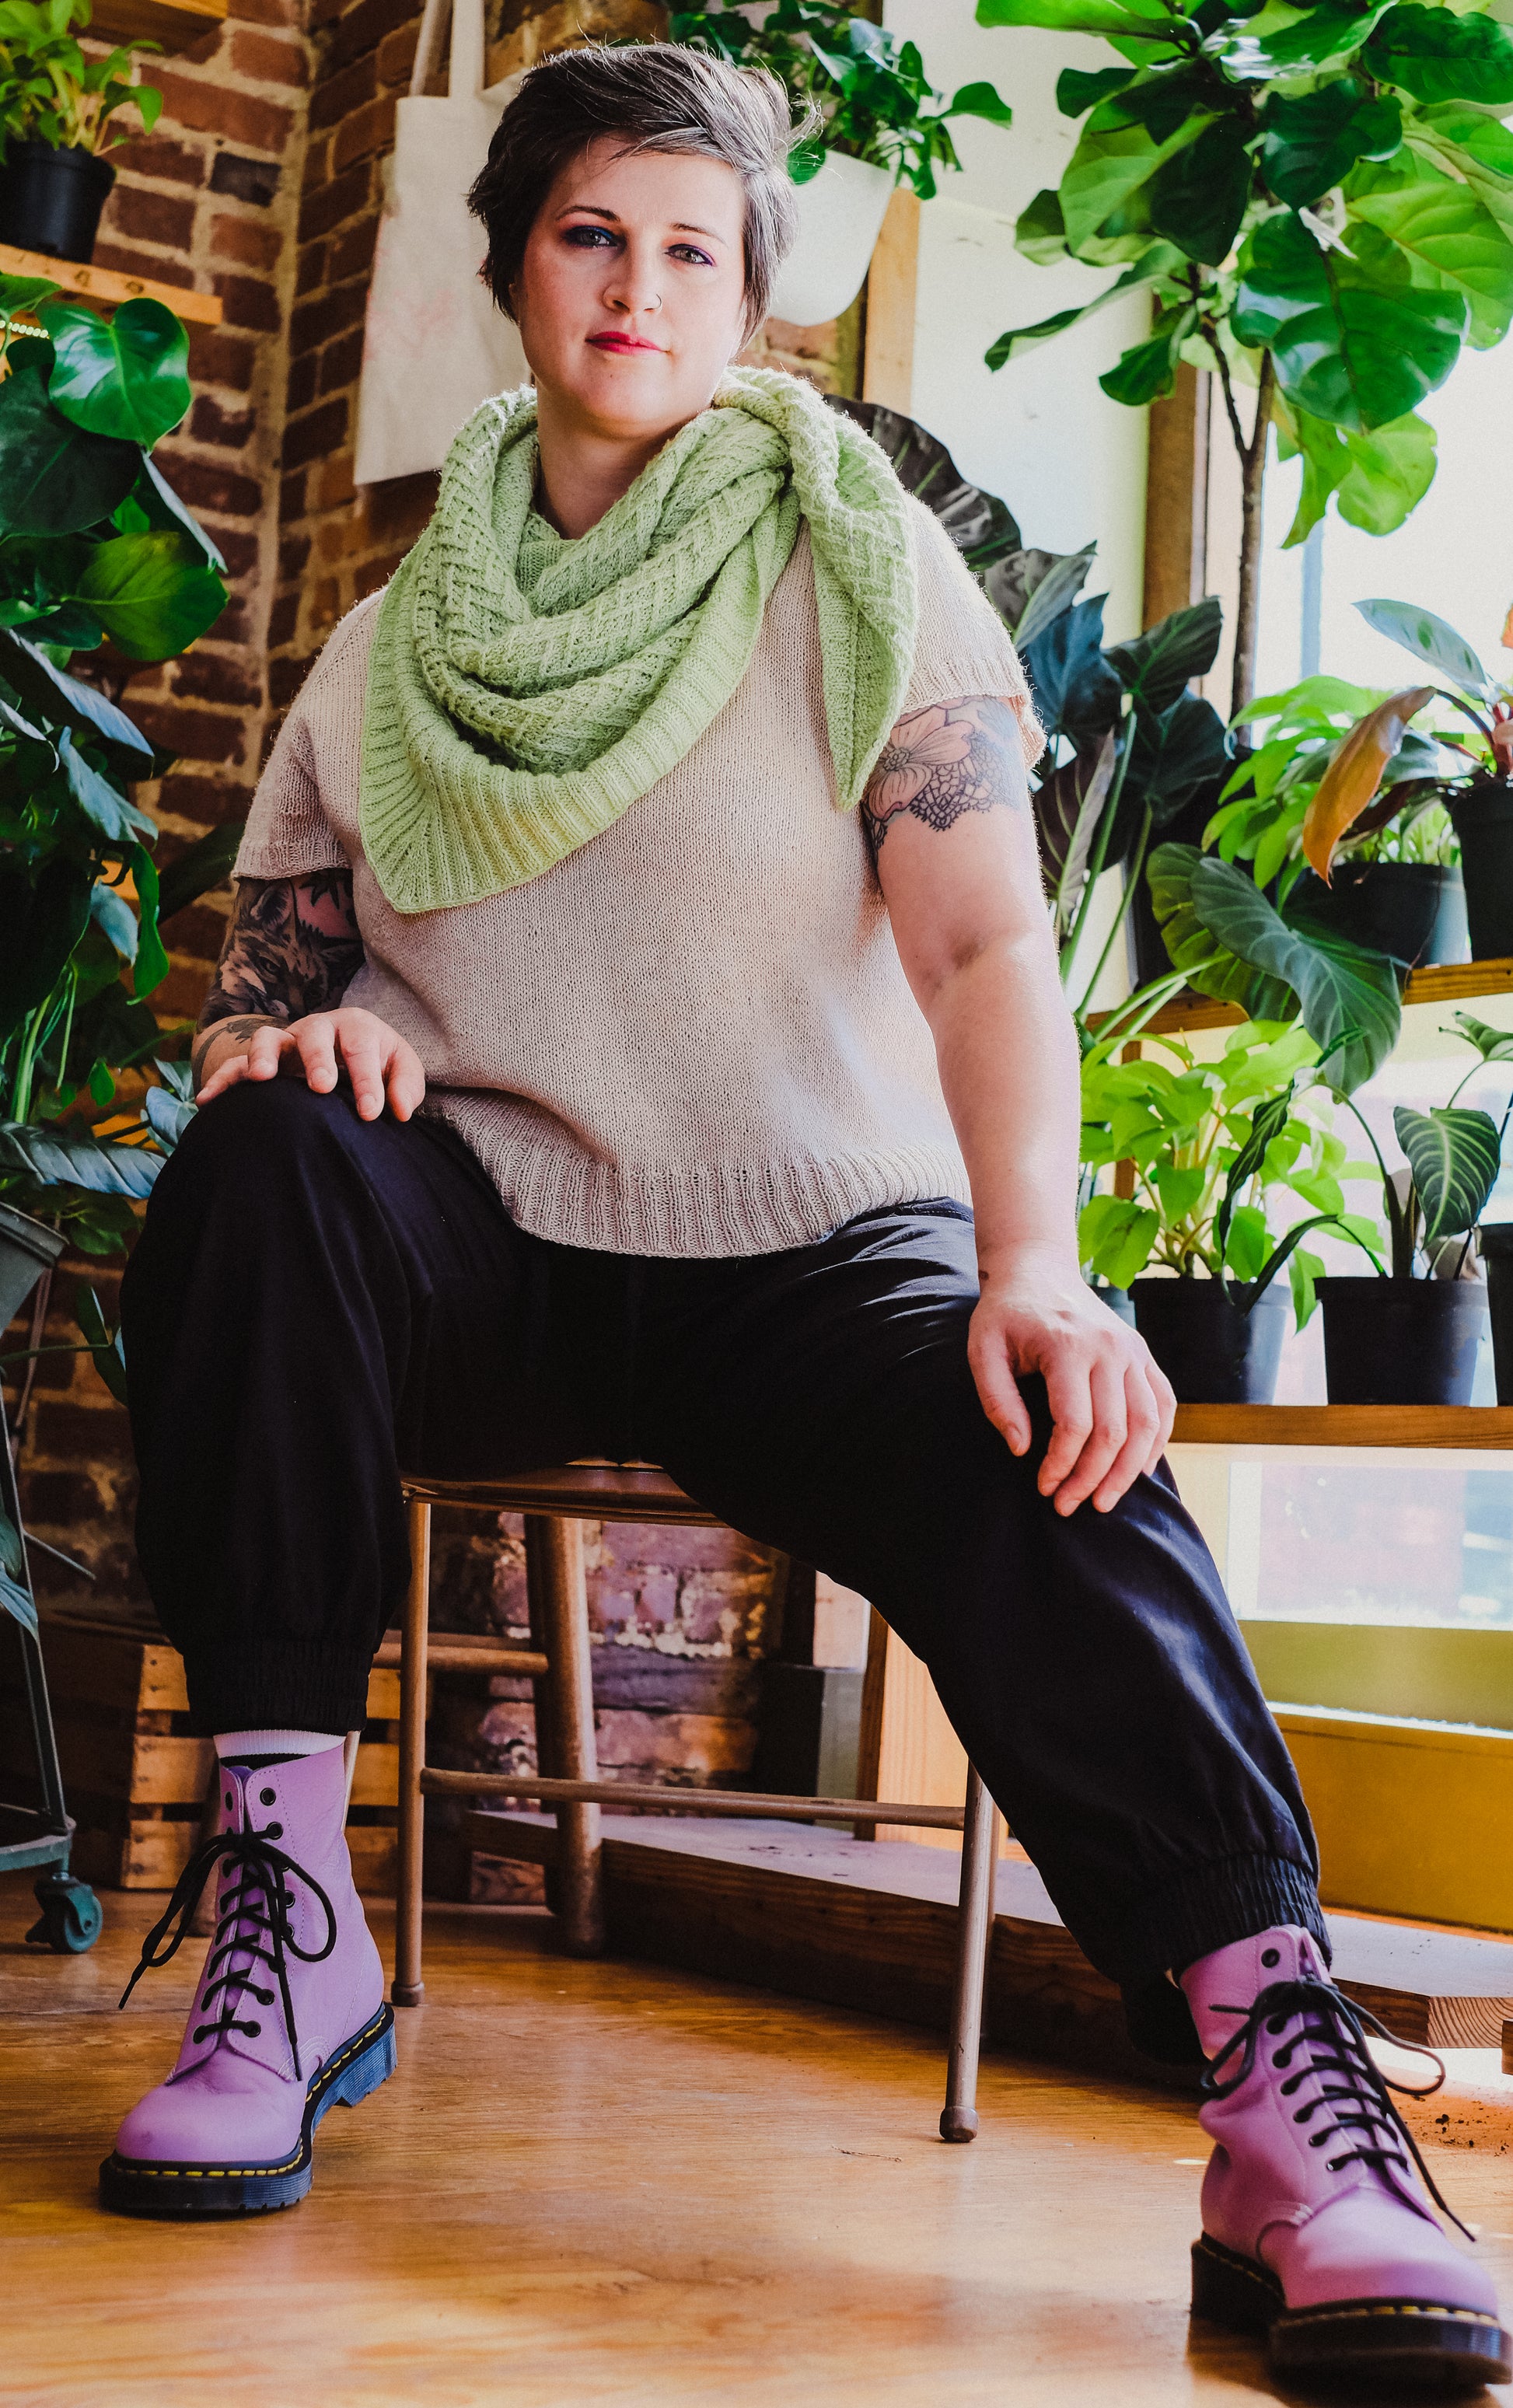 Jen sits on a chair, looking down at the camera. She wears a neon green scarf - the Sepal shawl - with a light beige, hand knit tee and black pants. Houseplants can be seen in the background.